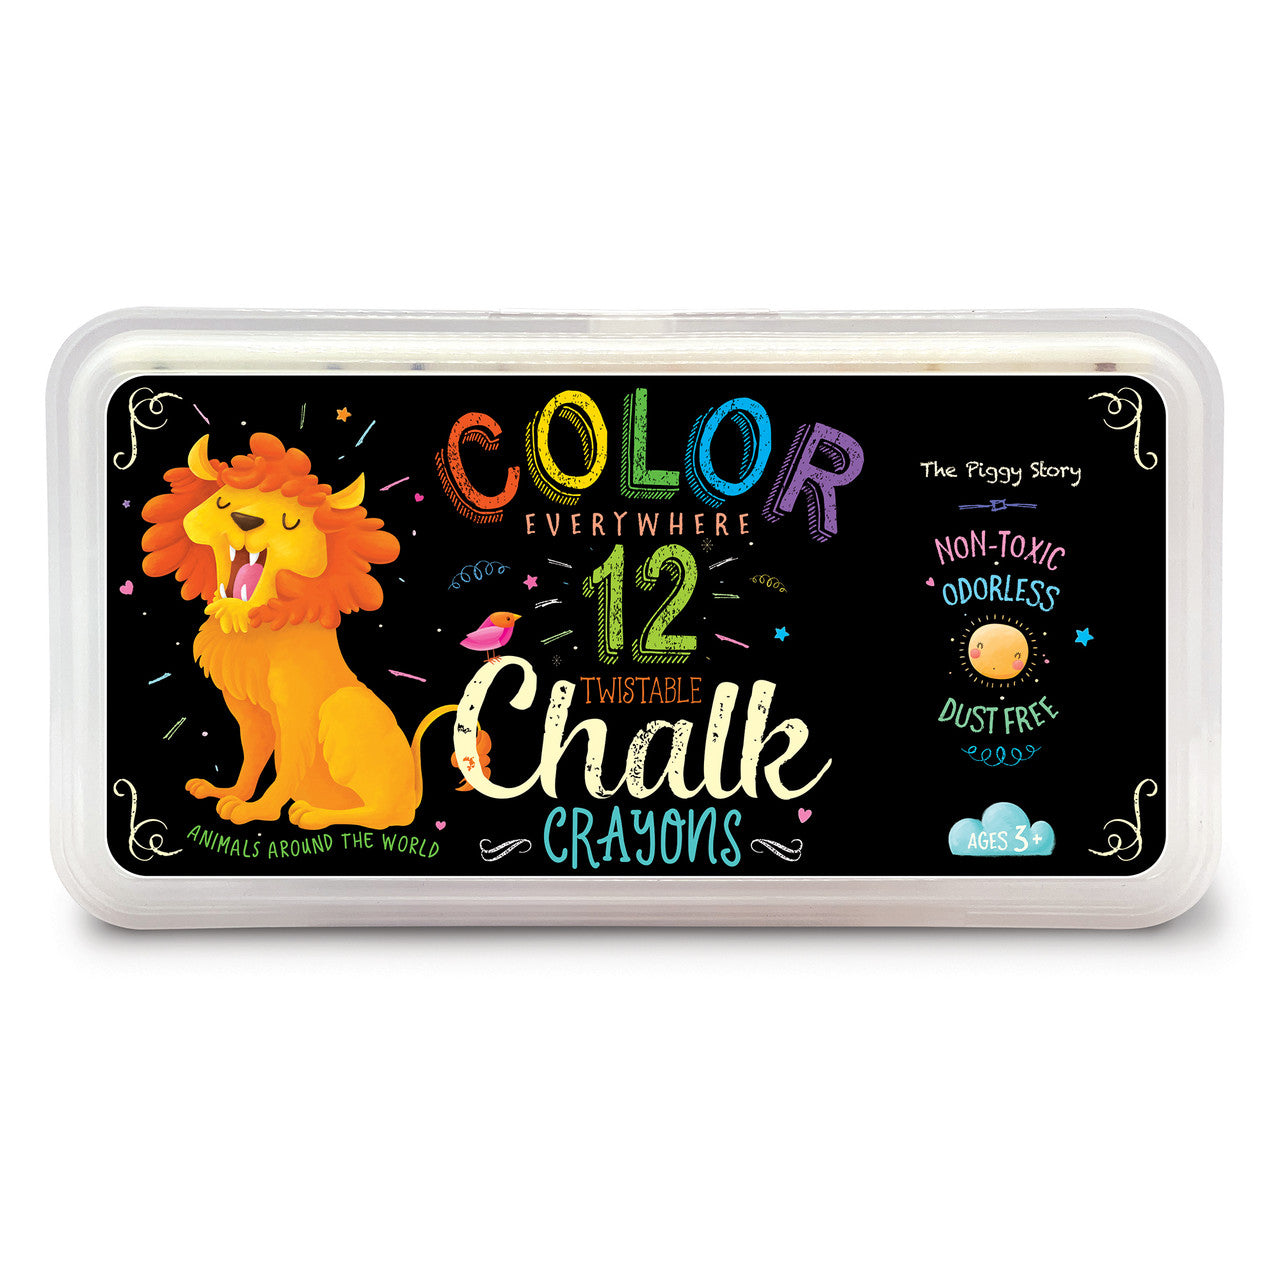 Color Everywhere Chalk Crayons / Animals Around the World